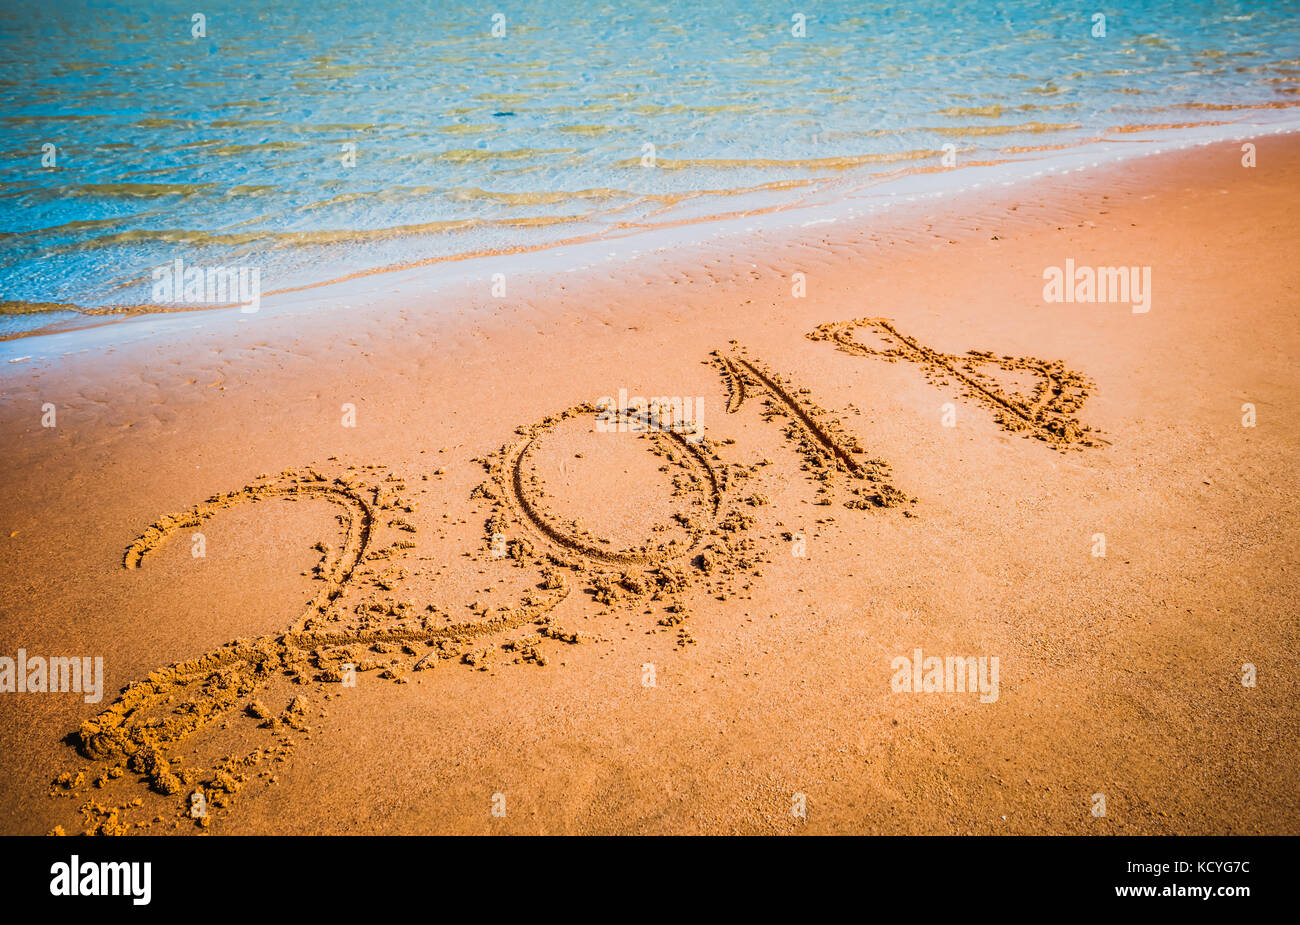 New Year 2018 coming concept. Digits on sand beach Stock Photo